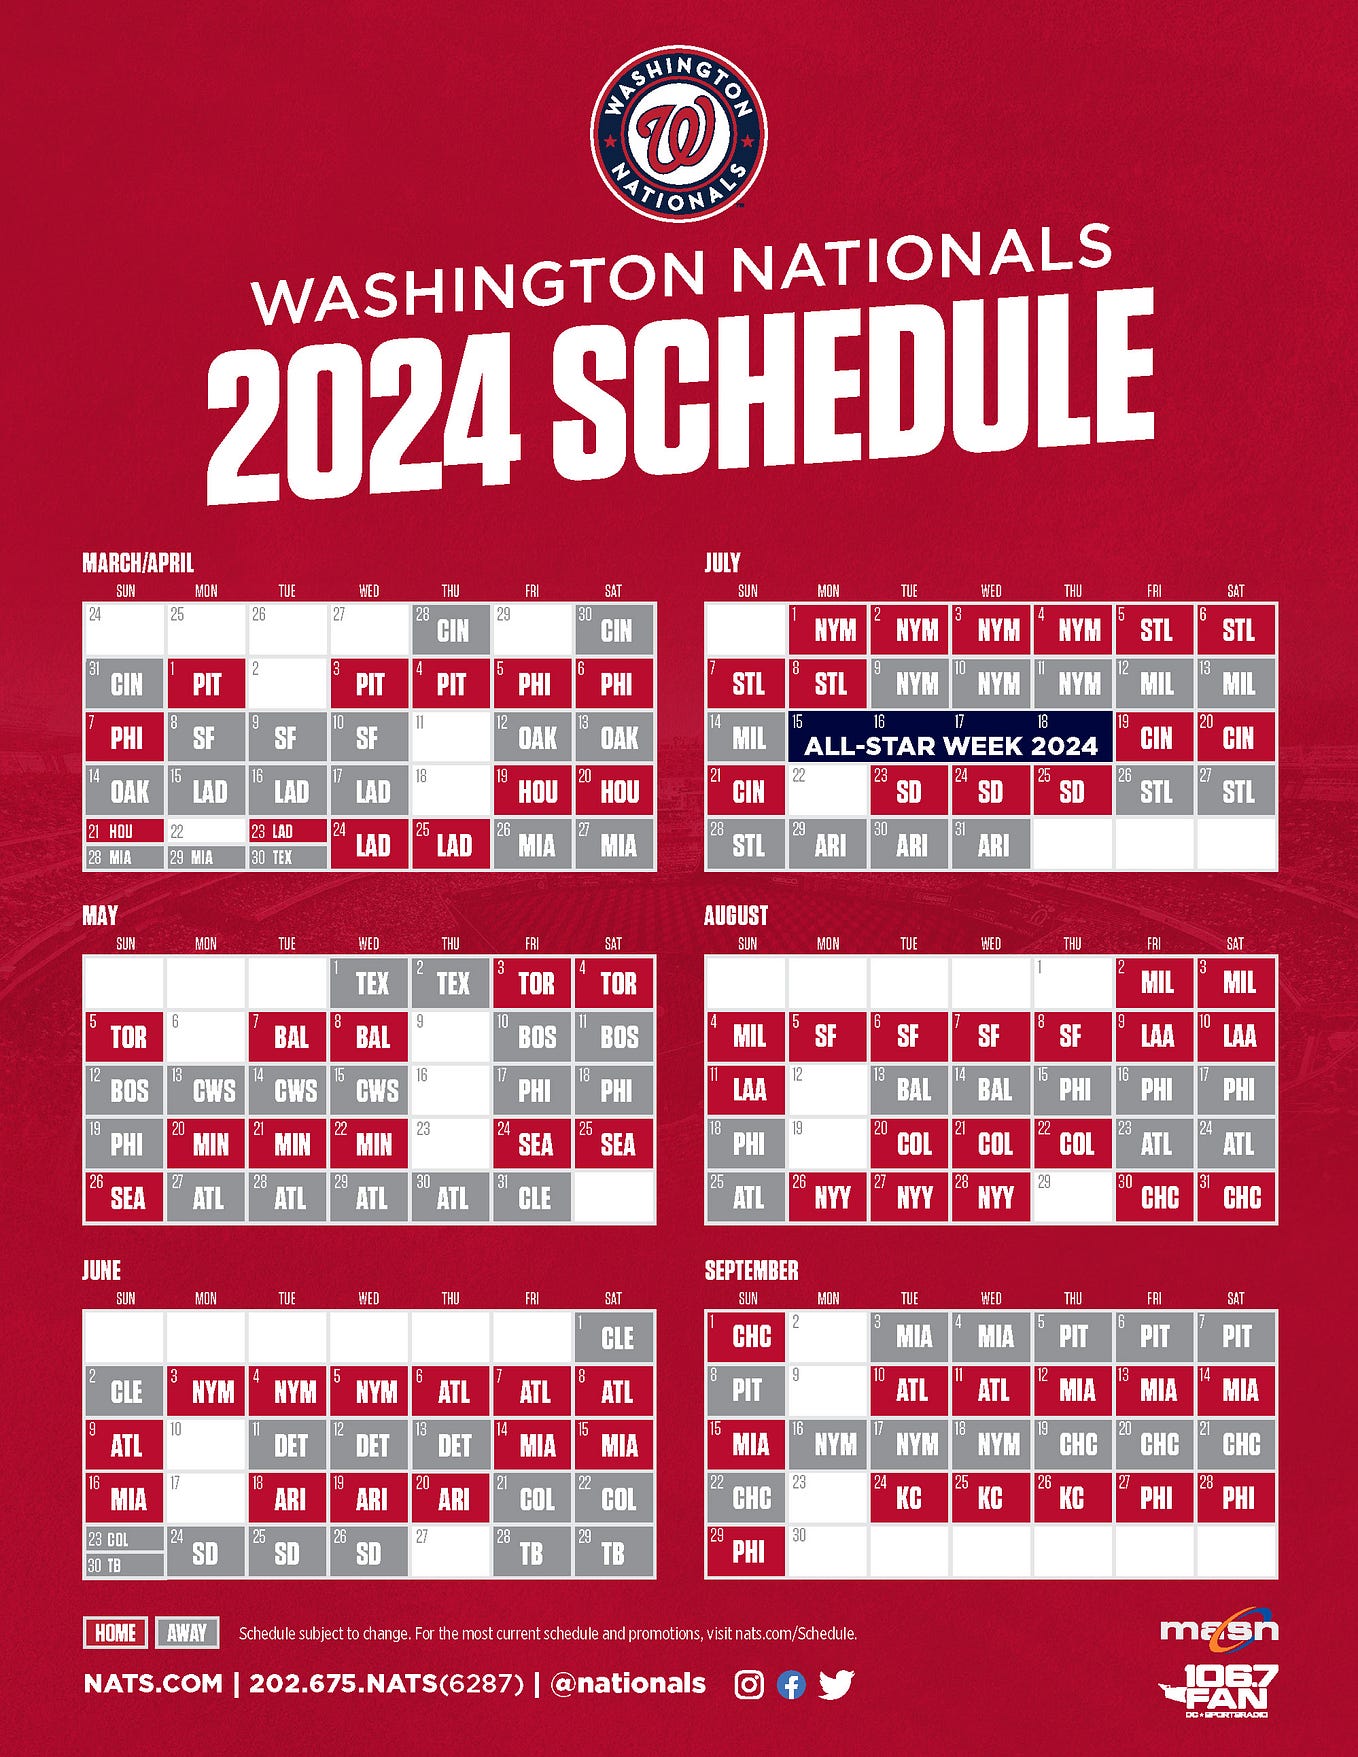 Nationals announce 2024 schedule